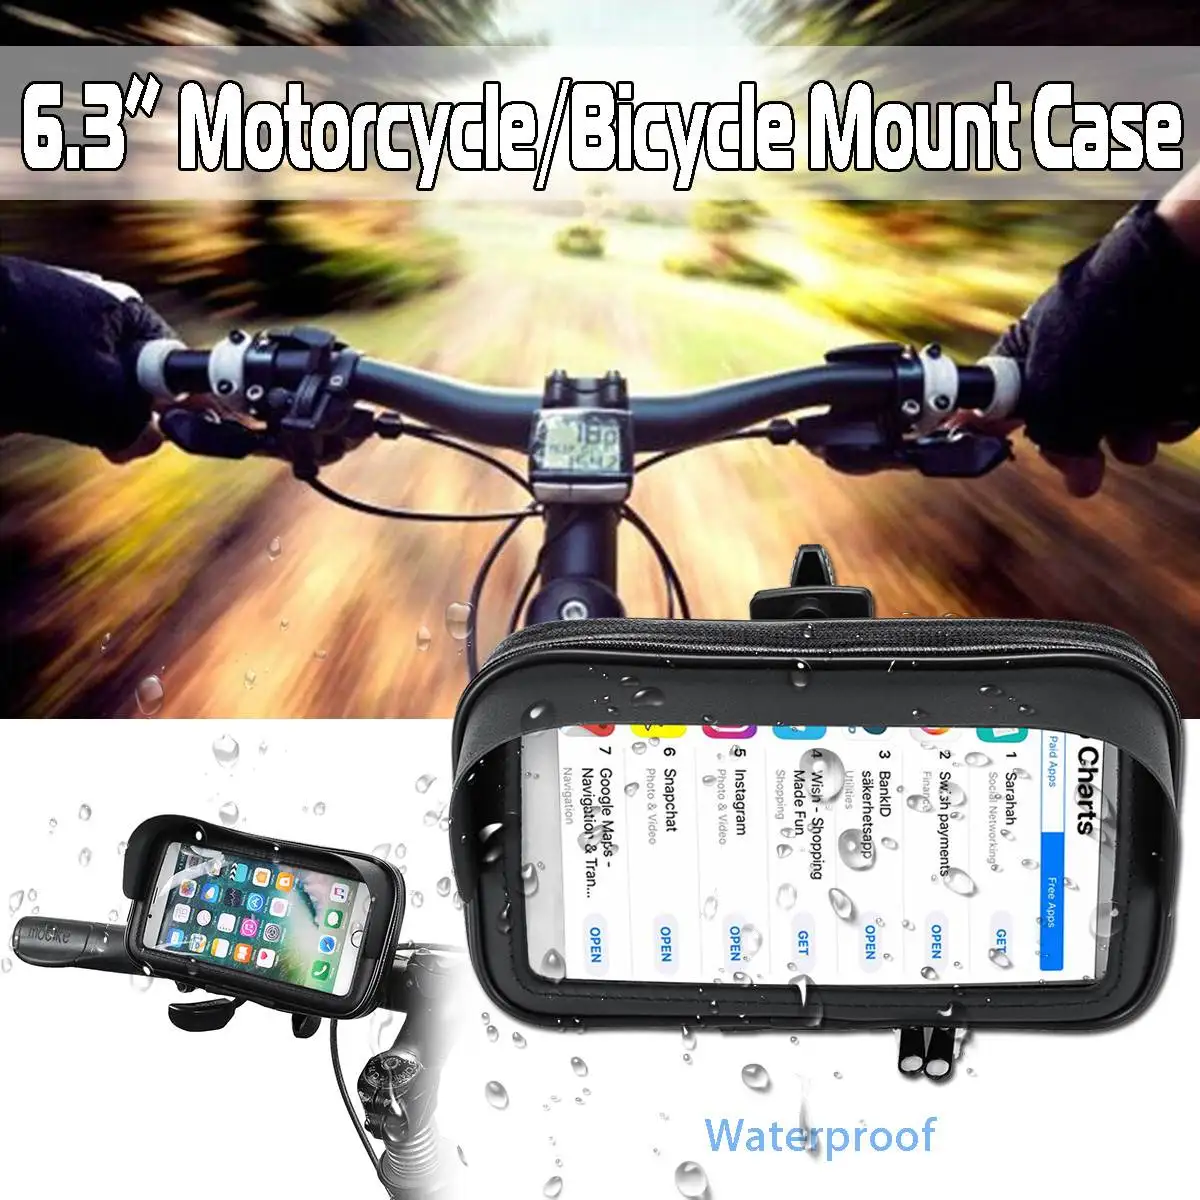 4.0-6.0 Phones-360° Rotation. Galaxy S9/S9 Plus Removable Holder Skretch Silicone Bike Phone Mount Universal Motorcycle Handlebar Mount Fits for iPhone 11/Pro,XR XS Max/8/8 Plus,7,6/6s Plus 